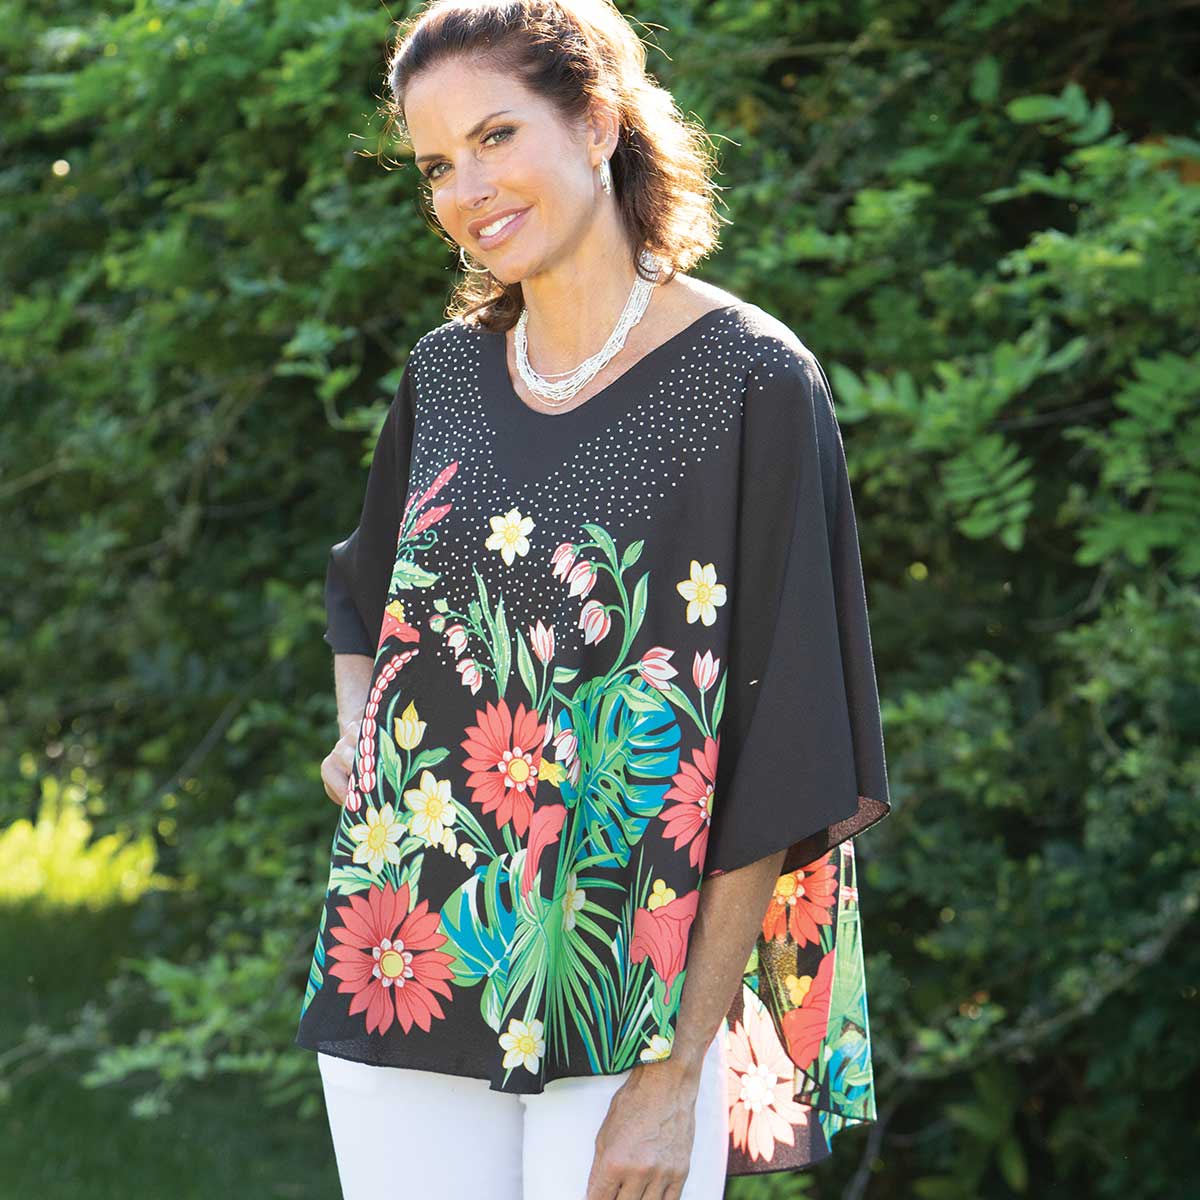 Sparkle Tunic with Coral Floral Design 35"x27"